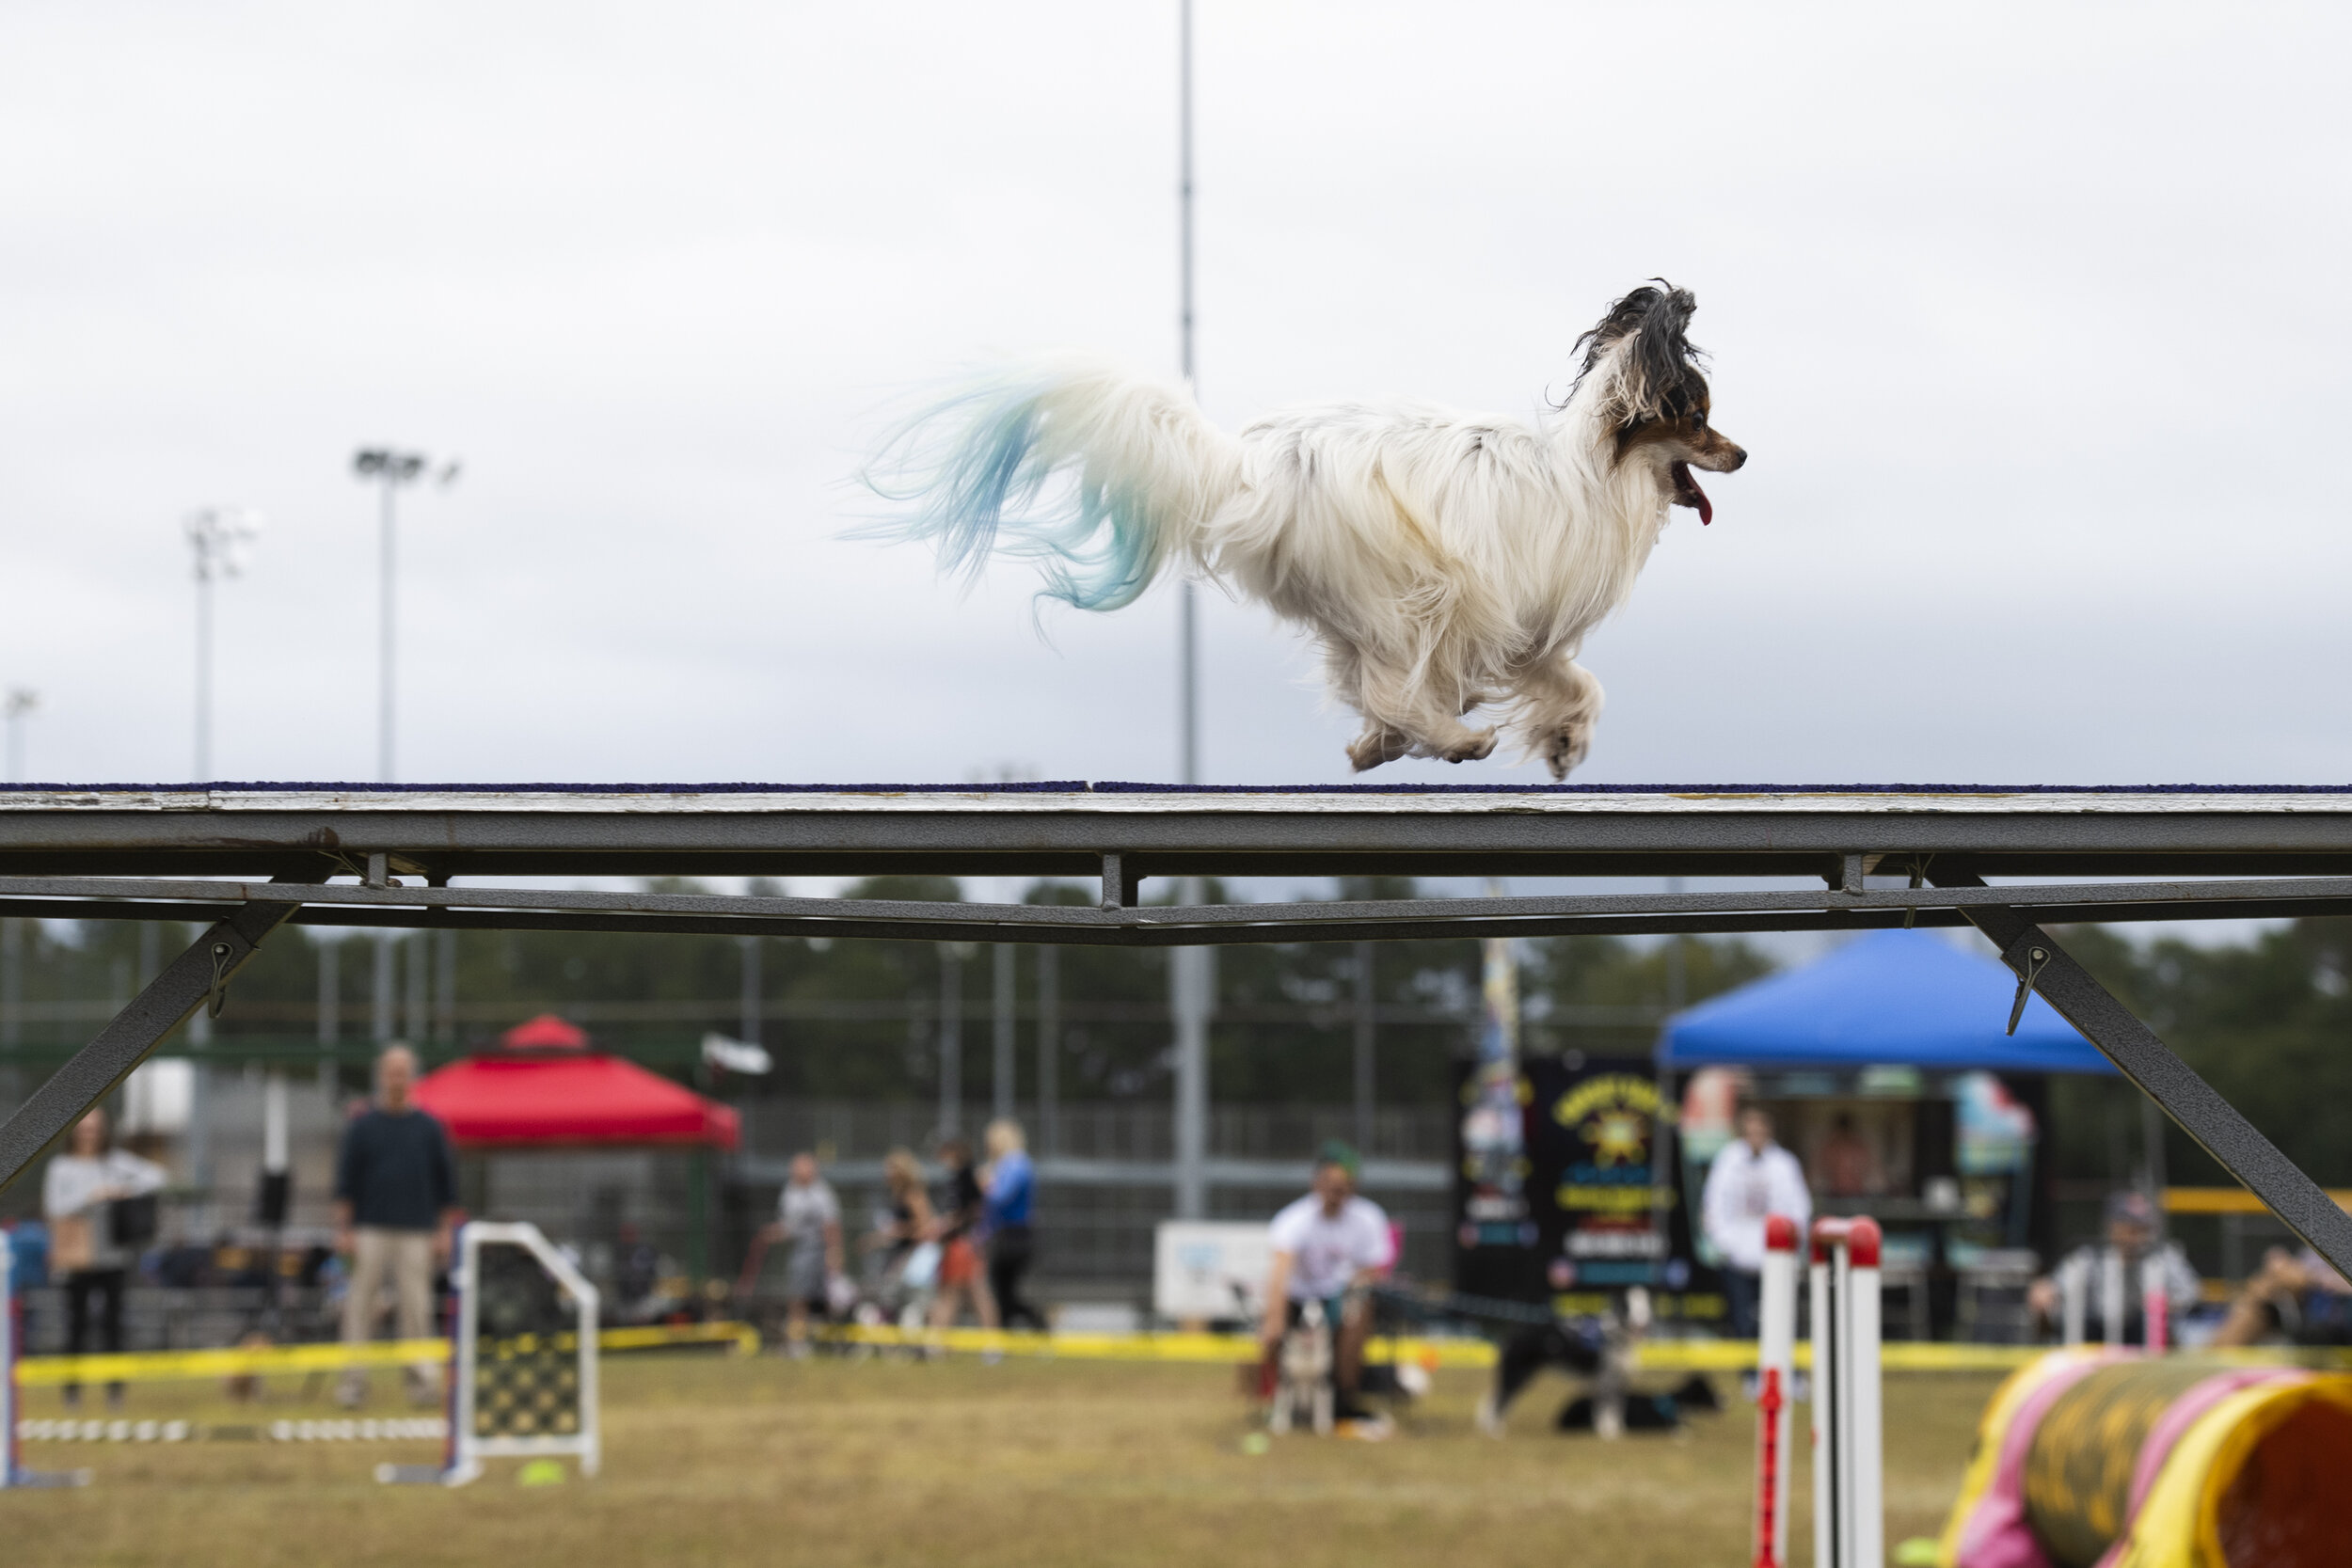  Ezion goes through the agility course during a demonstration by VIP Dog Sports at 36th Annual Bark in the Park festival in Sunset Park in Mauldin Saturday, Oct. 26, 2019. (The Greenville News) 